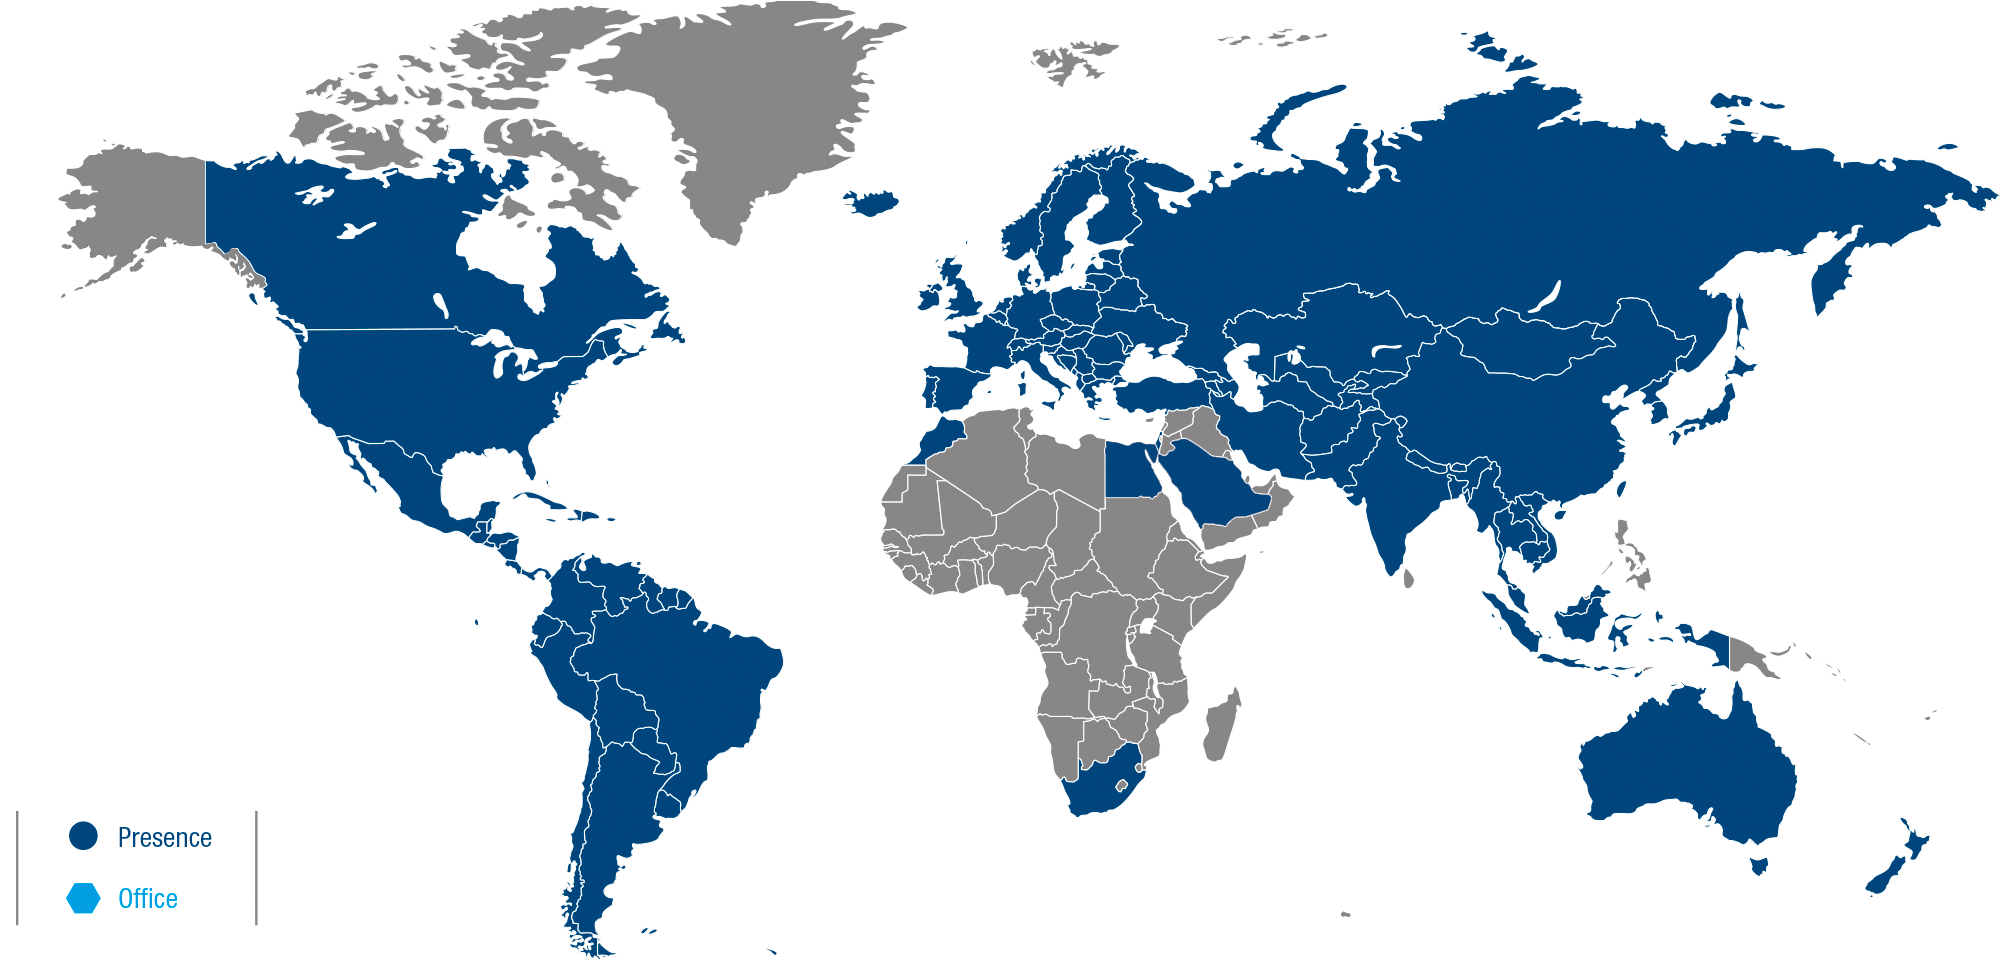 Map showing Medichem's presence and offices around the world